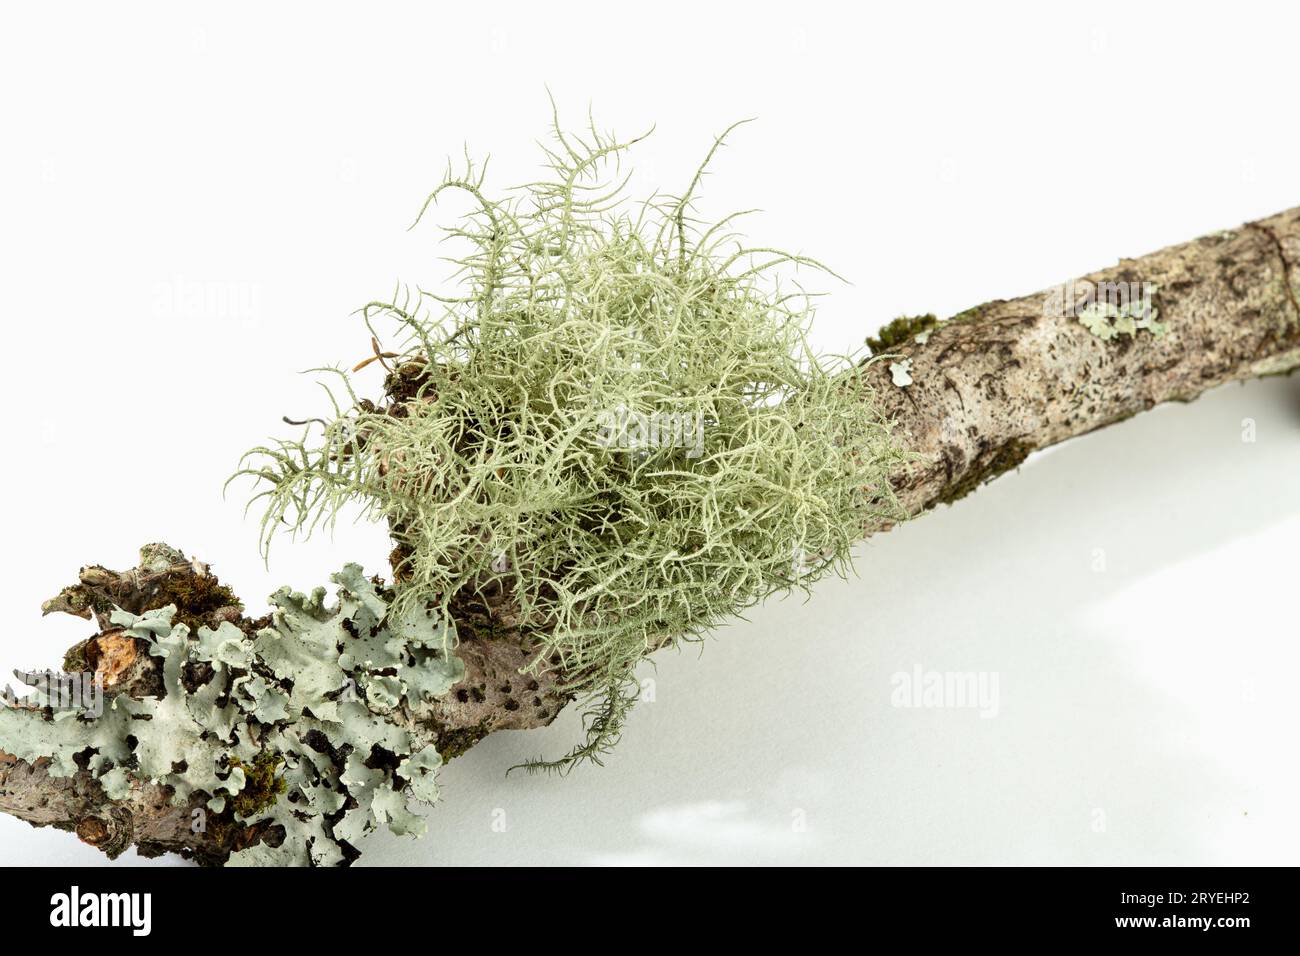 Lichen on tree branch isolated on white background Stock Photo